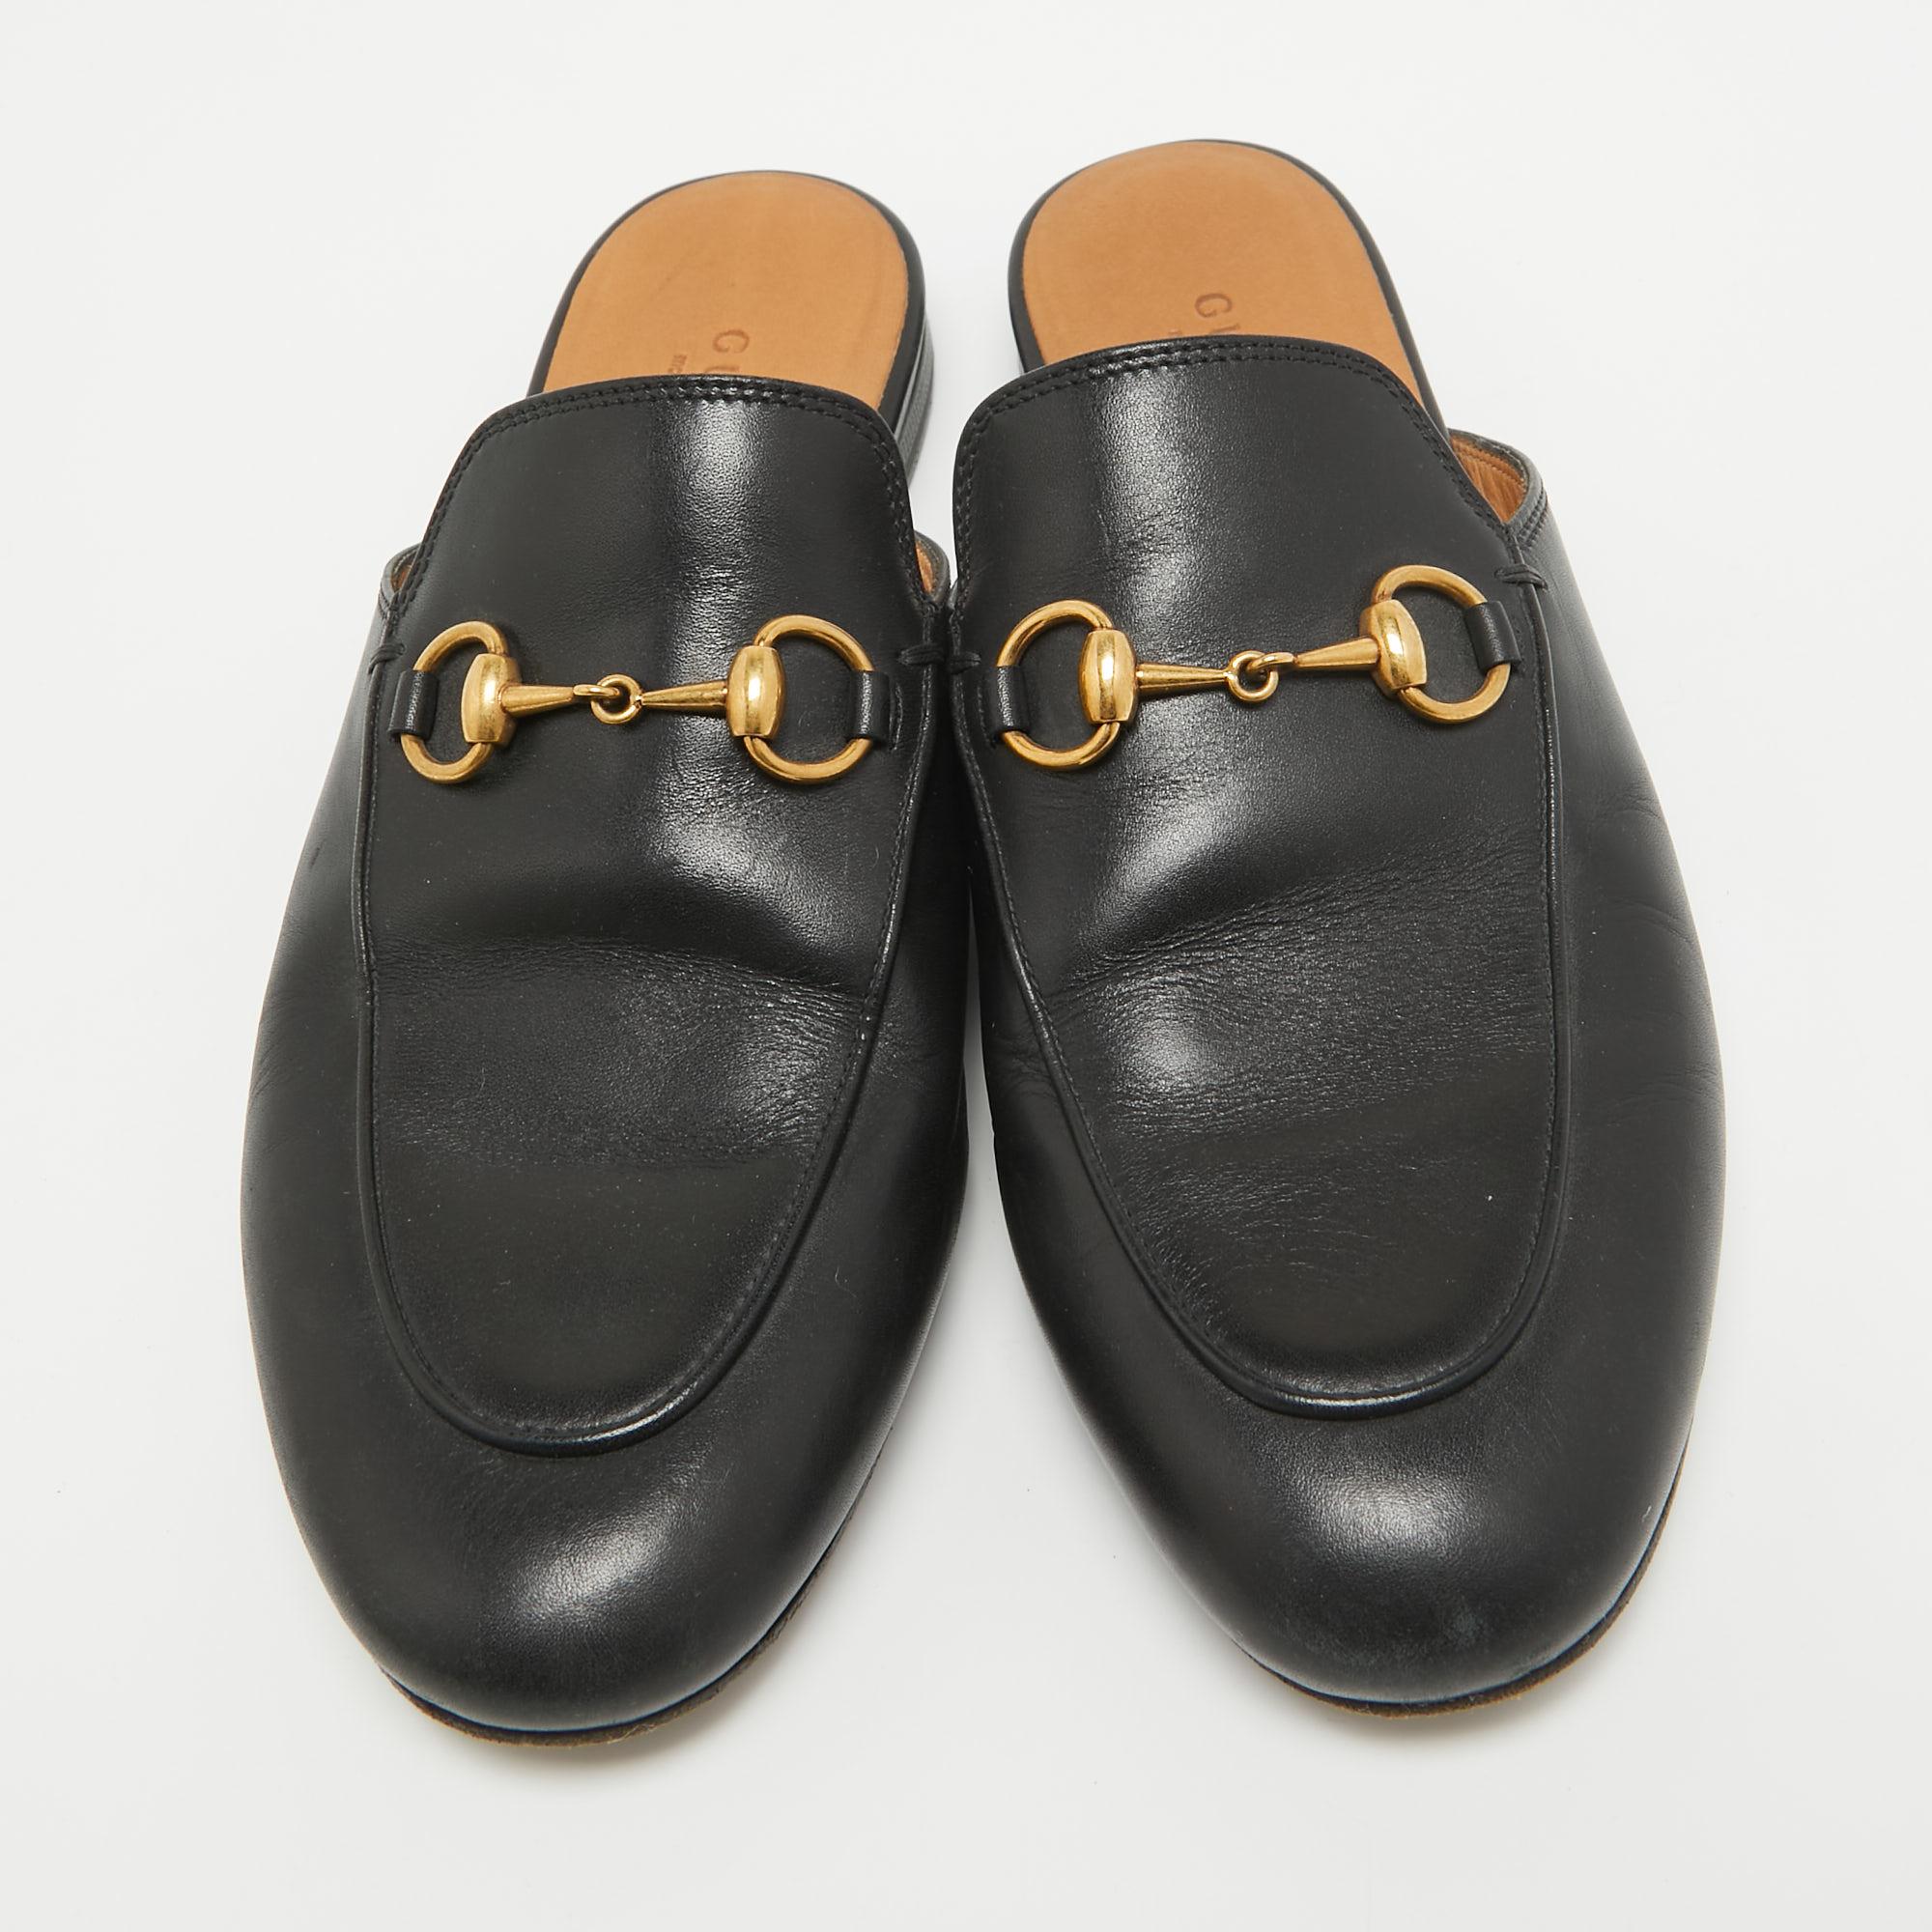 Gucci Black Leather Princetown Flat Mules Size 36.5 For Sale 1